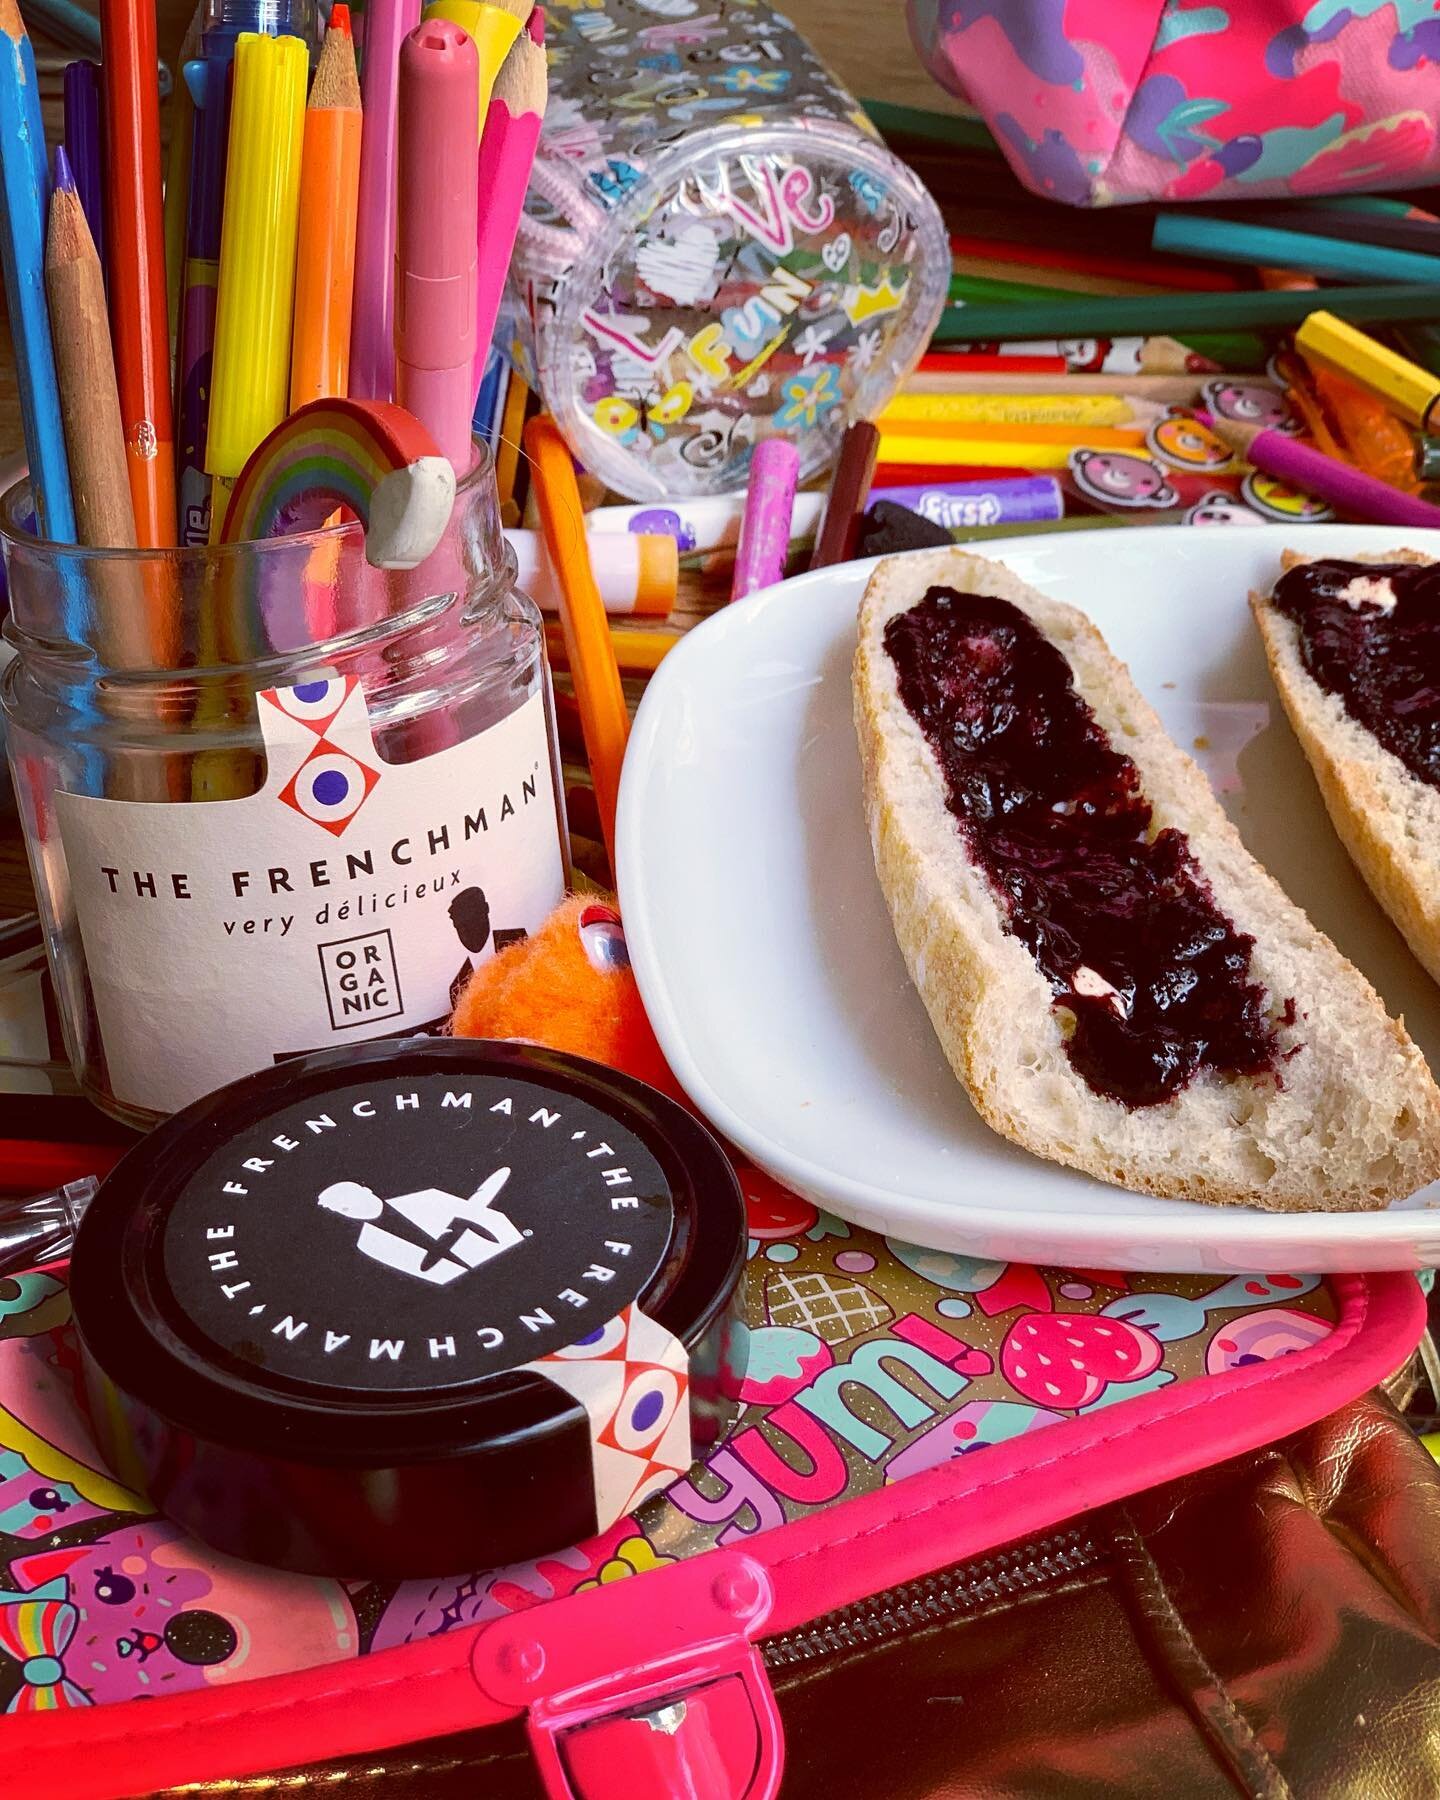 BACK TO SCHOOL

And to work and dailies!

Why not soften the start with some sun-drenched and tasty fruit spread for the early breakfasts and afternoon snacks. Whether in your porridge or yoghurt, on your sourdough bread, baguette or crackers or in a